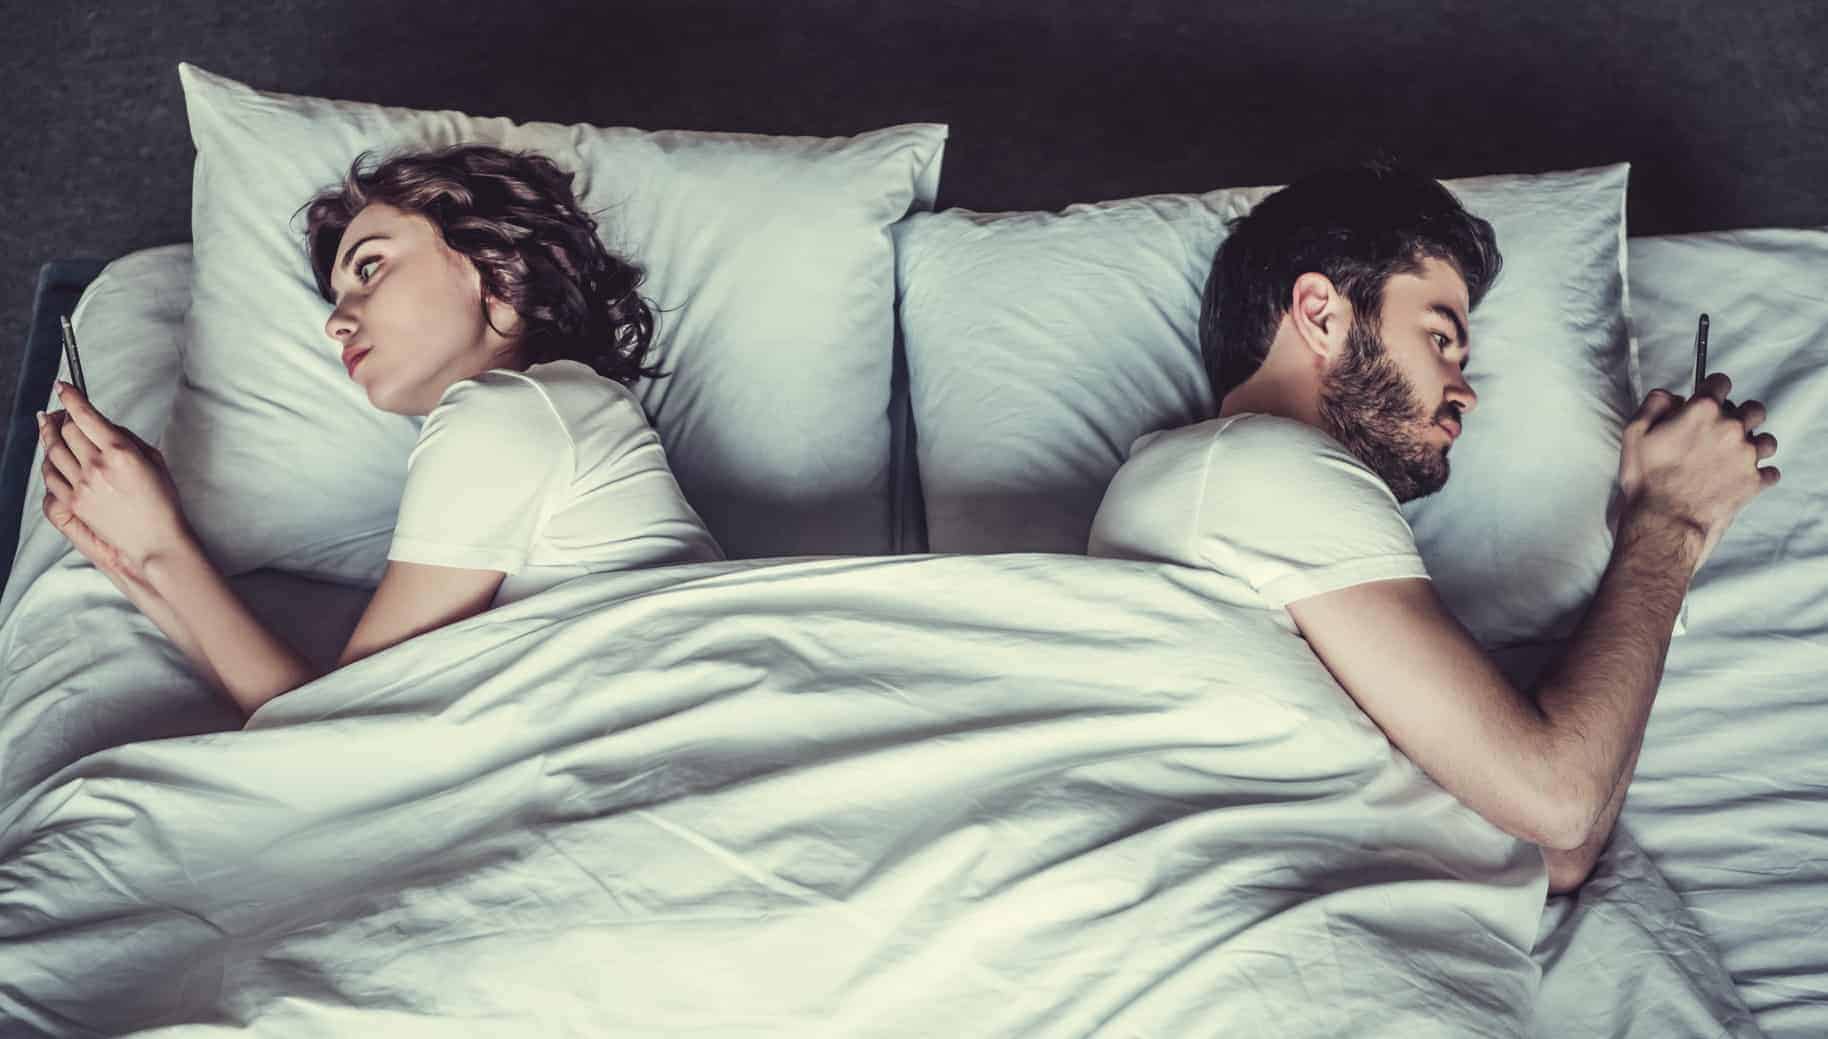 7 Behaviors Someone Displays In A Relationship When They Want to End It